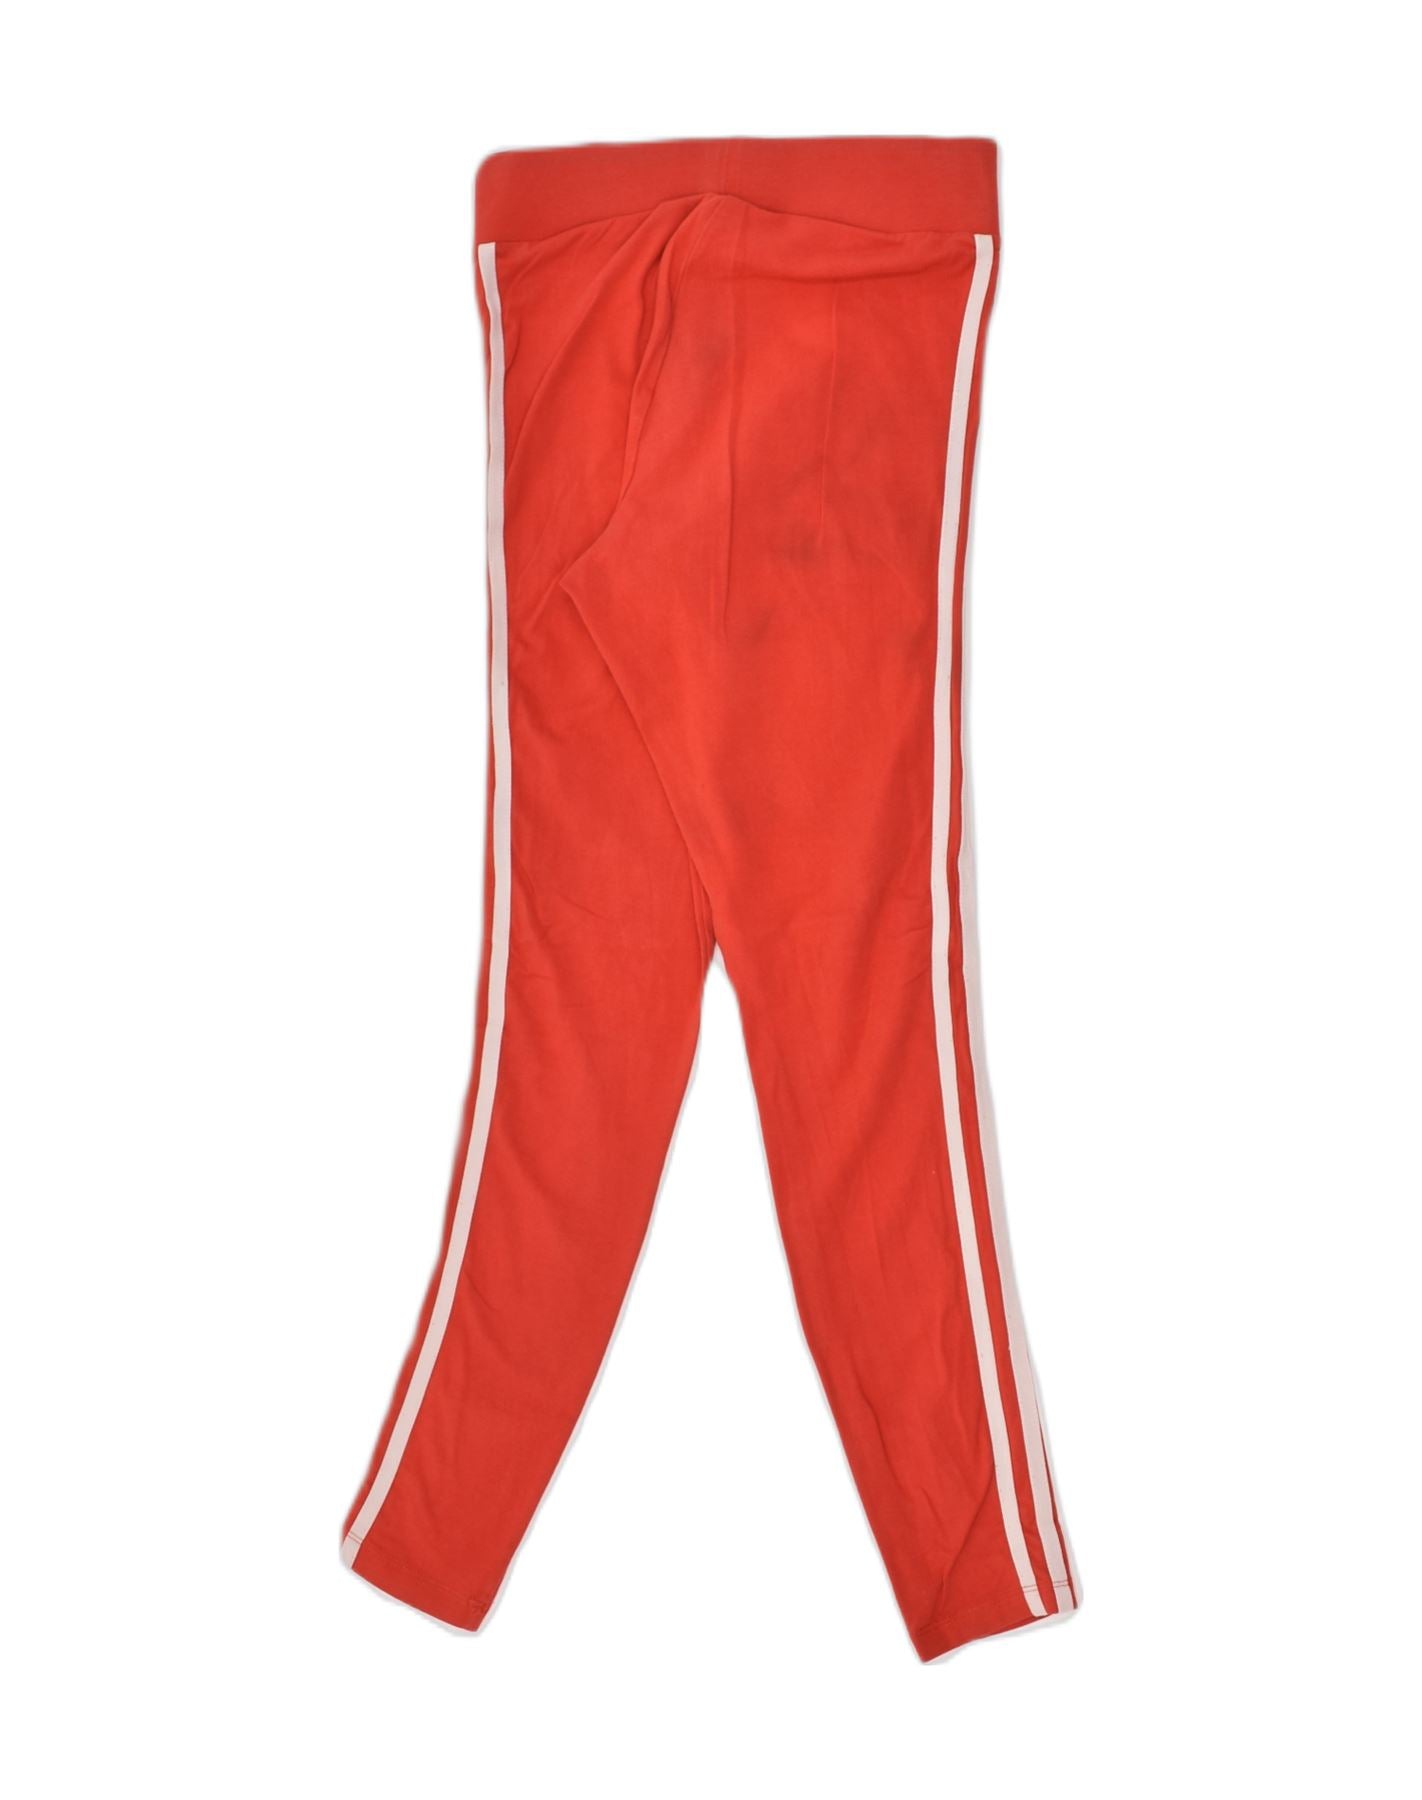 ADIDAS Womens Leggings UK 8 Small Red Cotton, Vintage & Second-Hand  Clothing Online